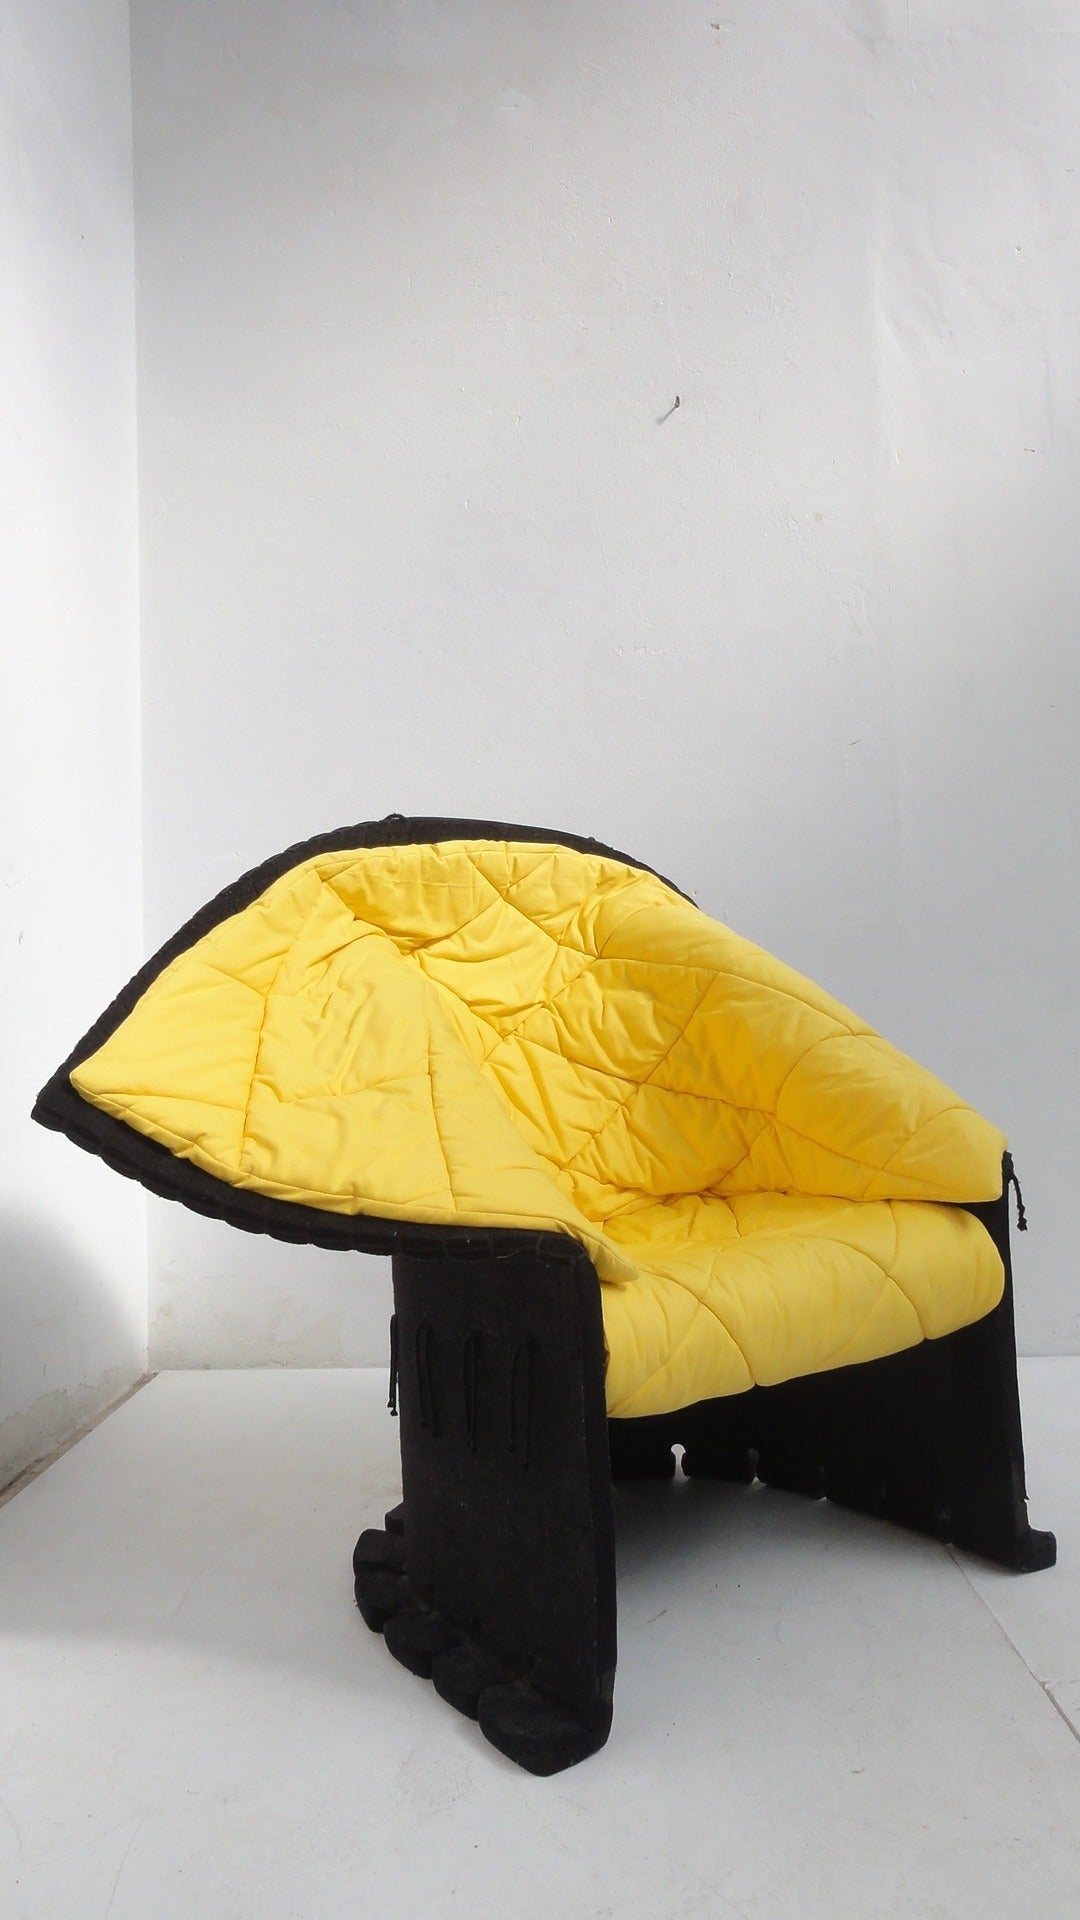 A low back Feltri chair by Gaetano Pesce for Cassina.

This example dates back to the early 1990s and has a new yellow cotton cushion.

A wonderful and playful chair for kids!